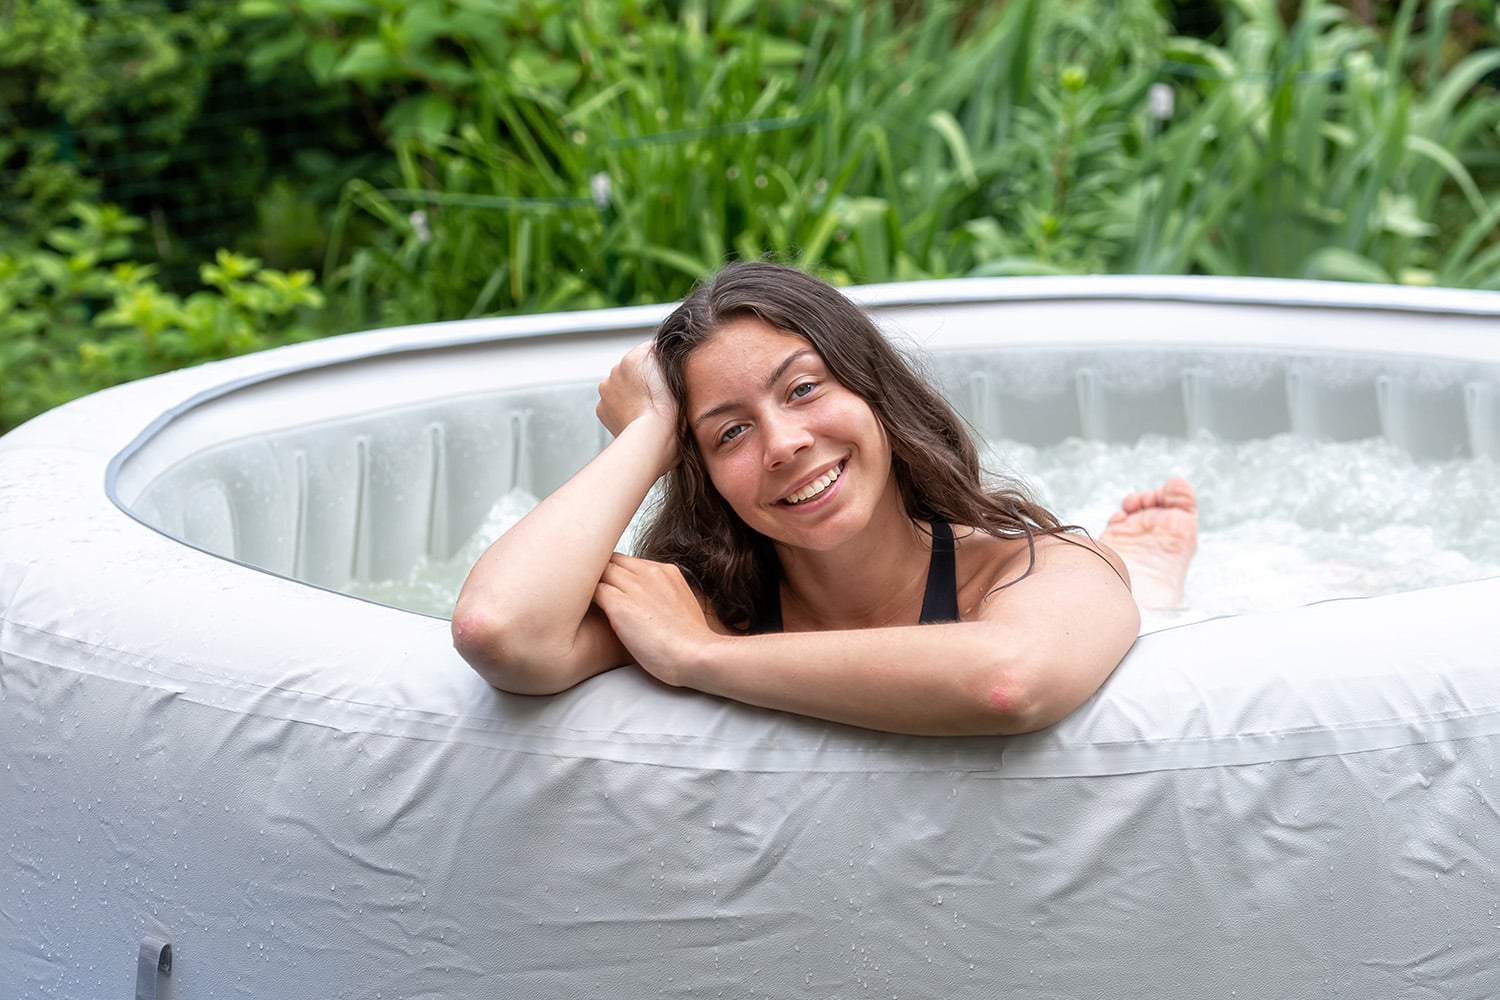 how-to-move-a-hot-tub-on-grass